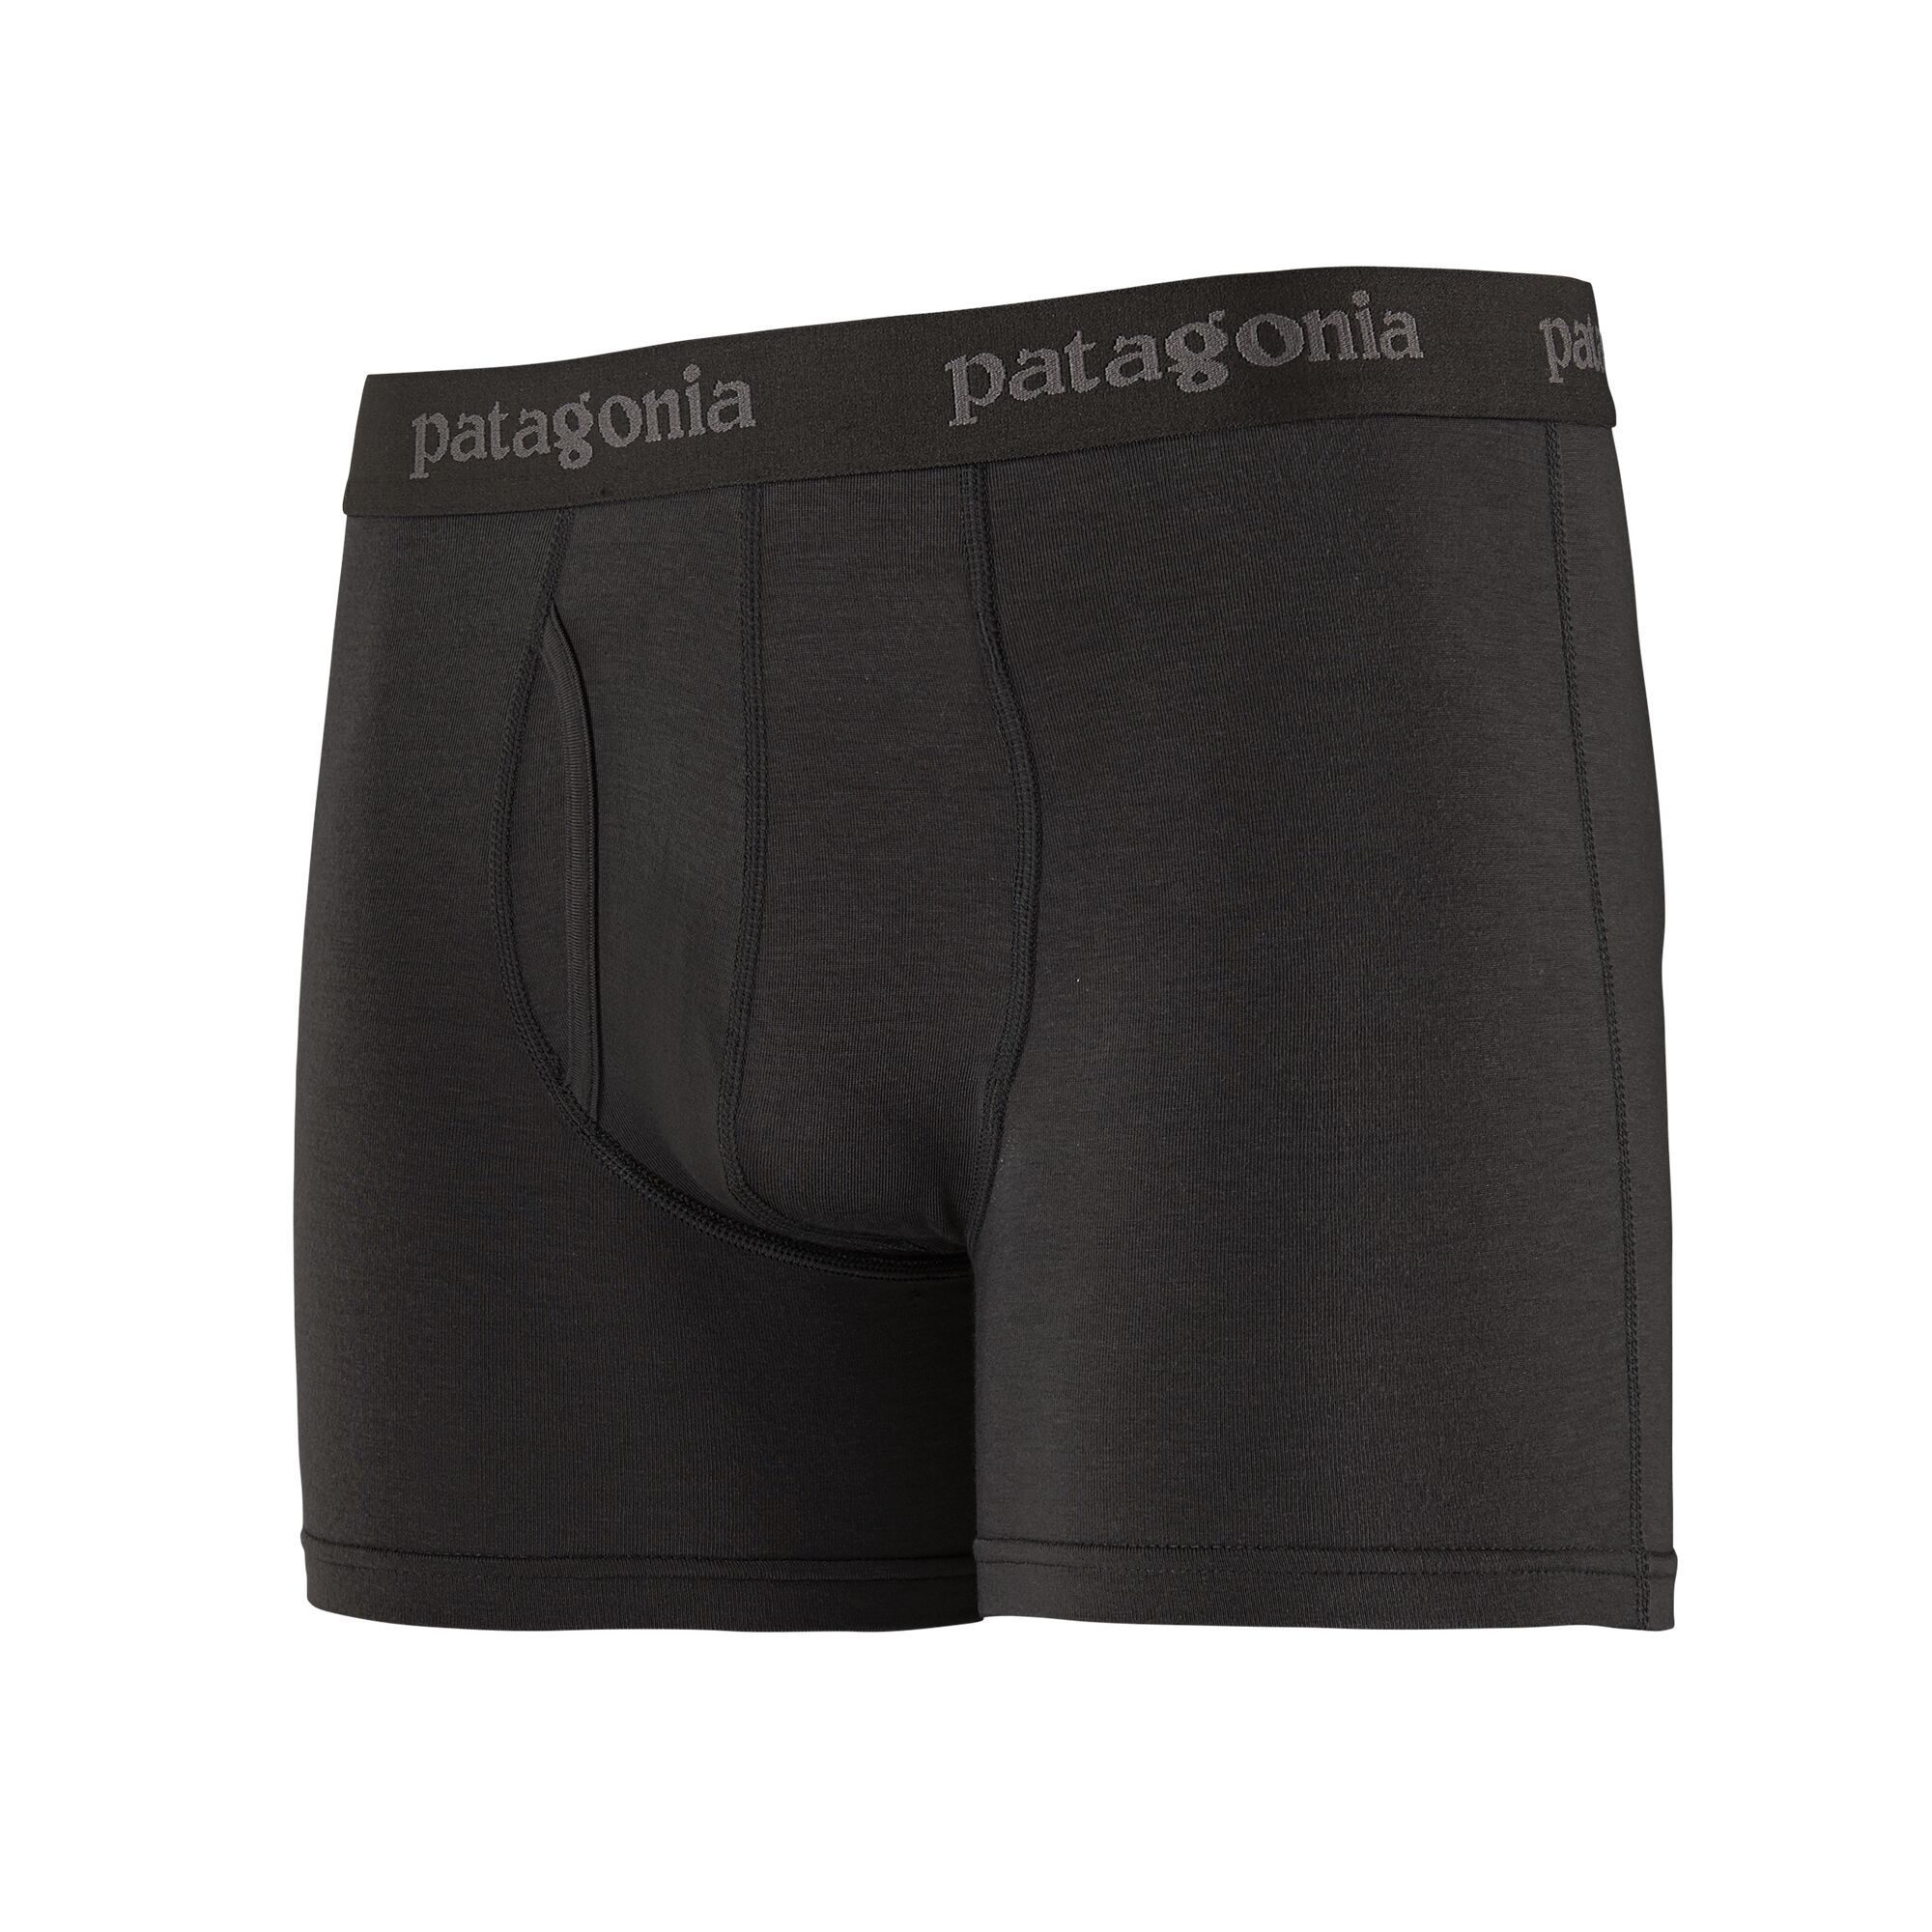 Patagonia Essential Boxer Briefs - From Wood-based TENCEL, Black / XL / 3"